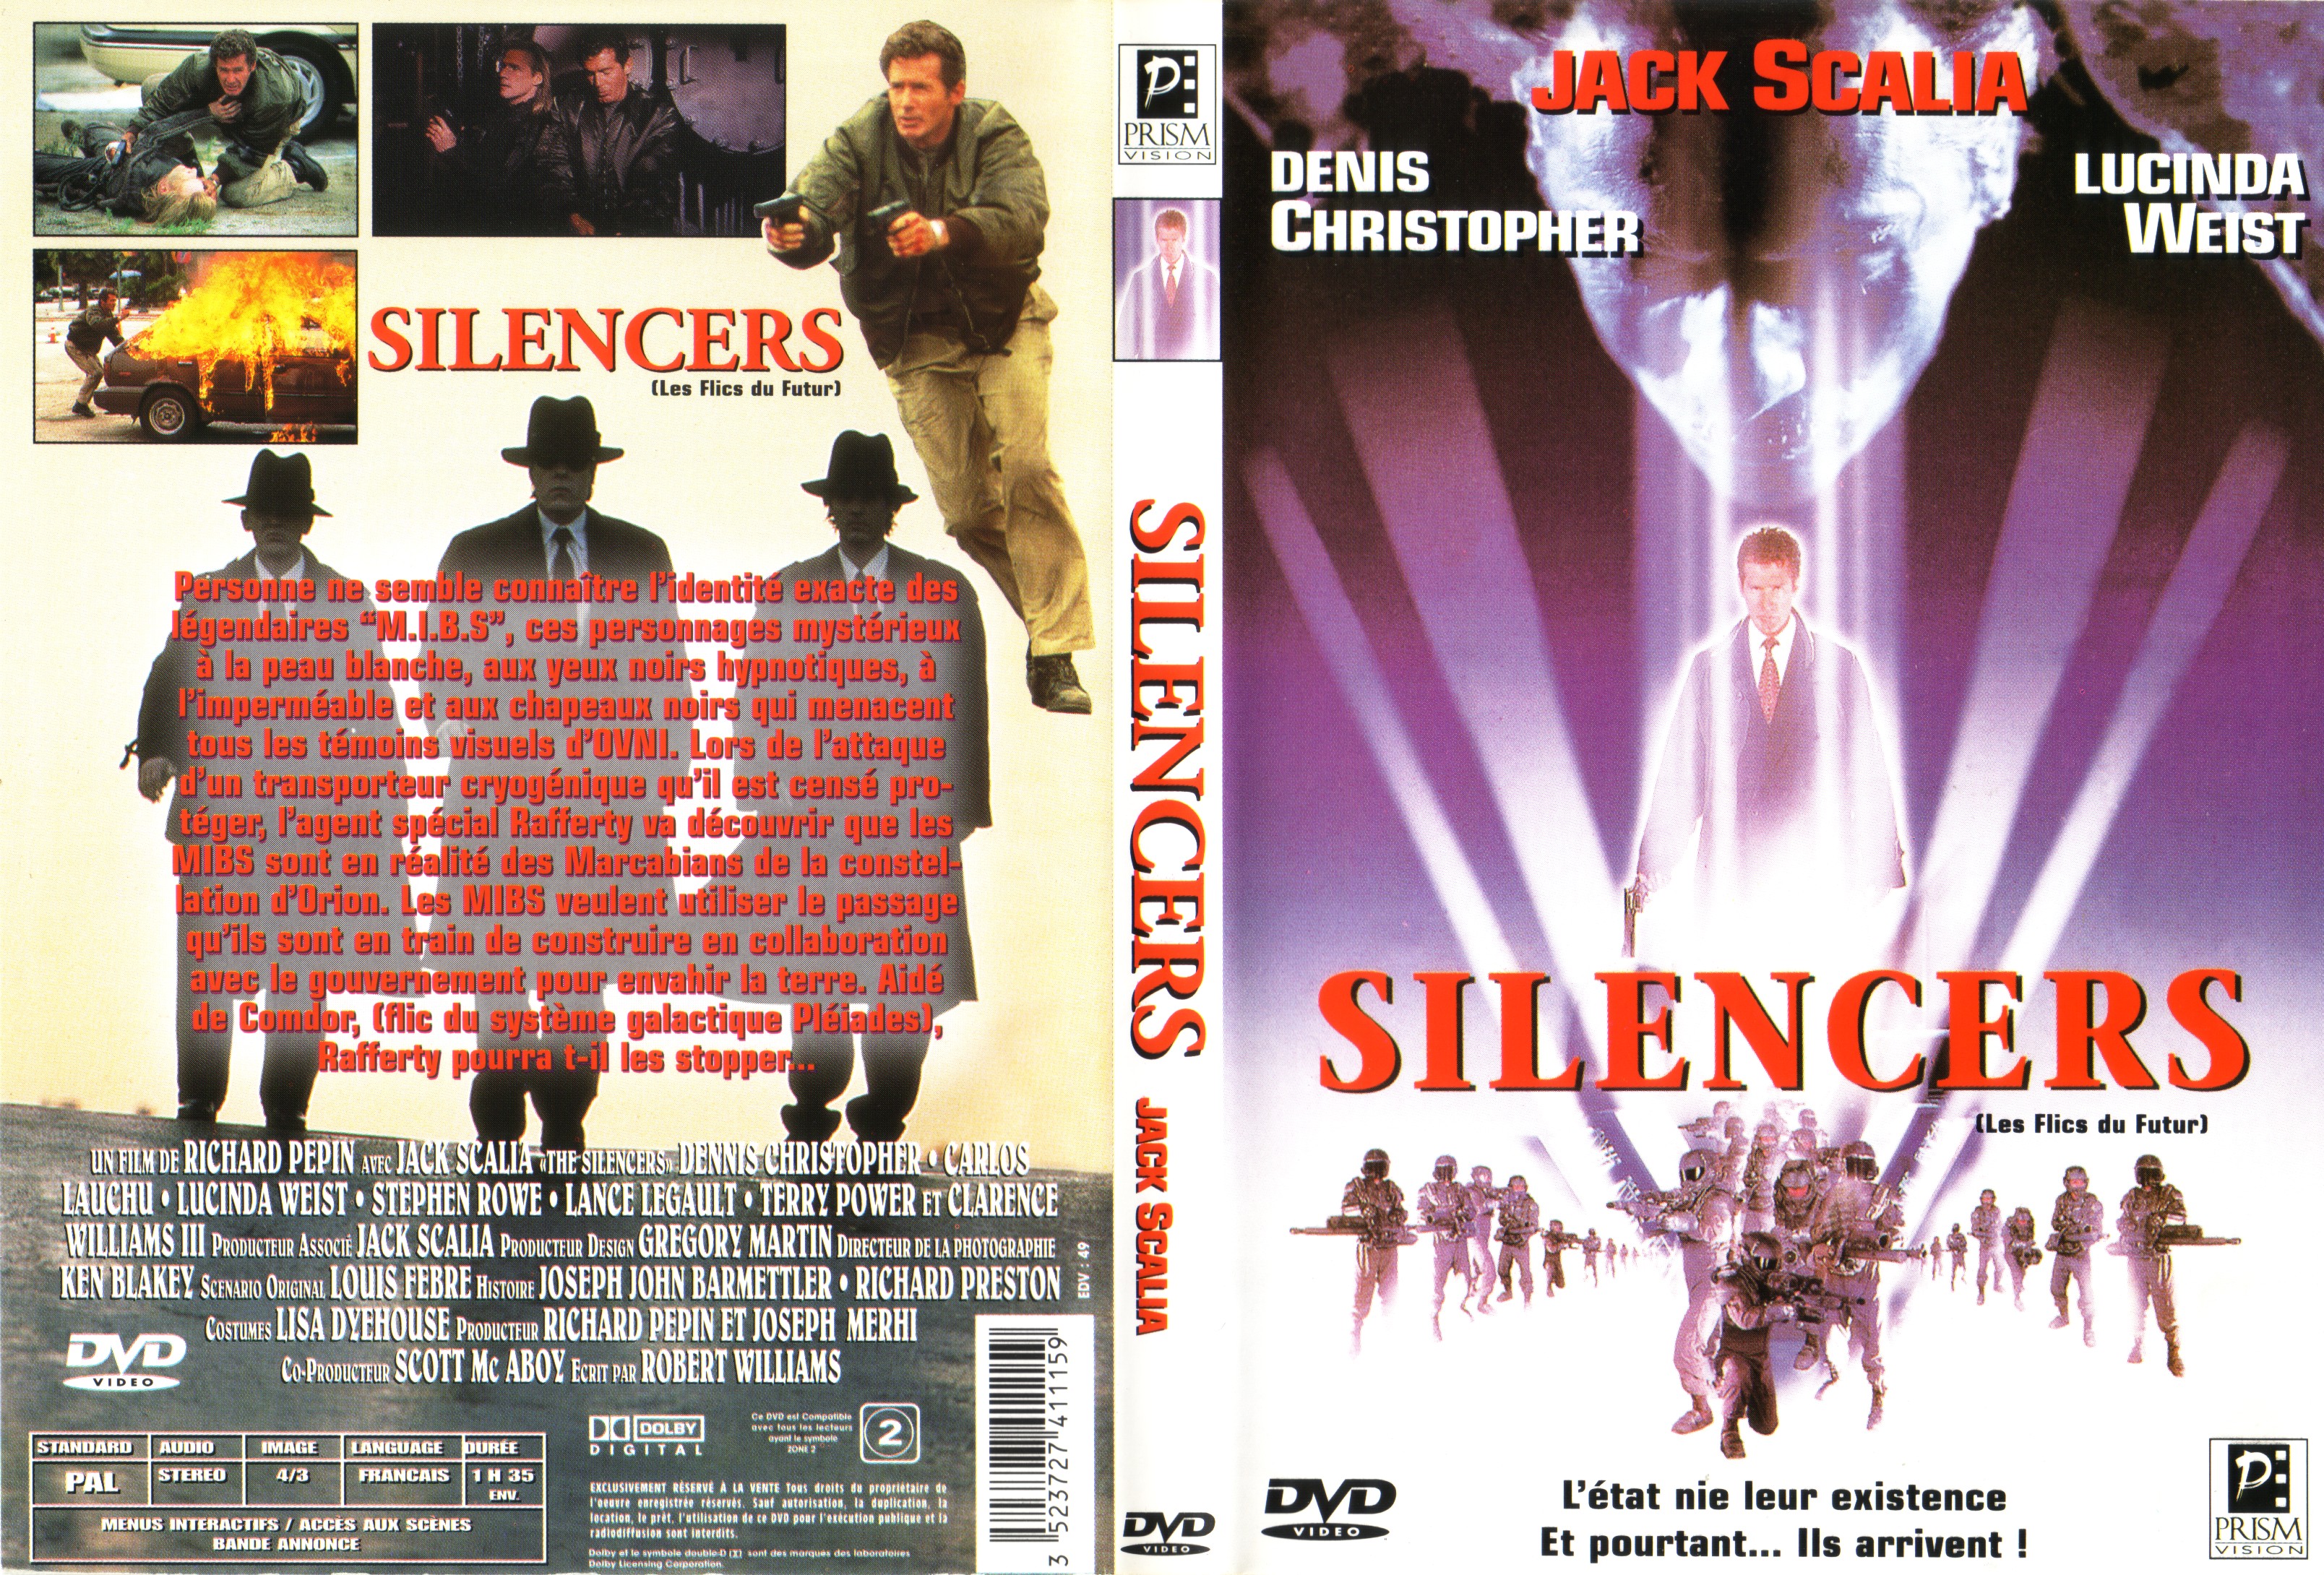 Jaquette DVD Silencers